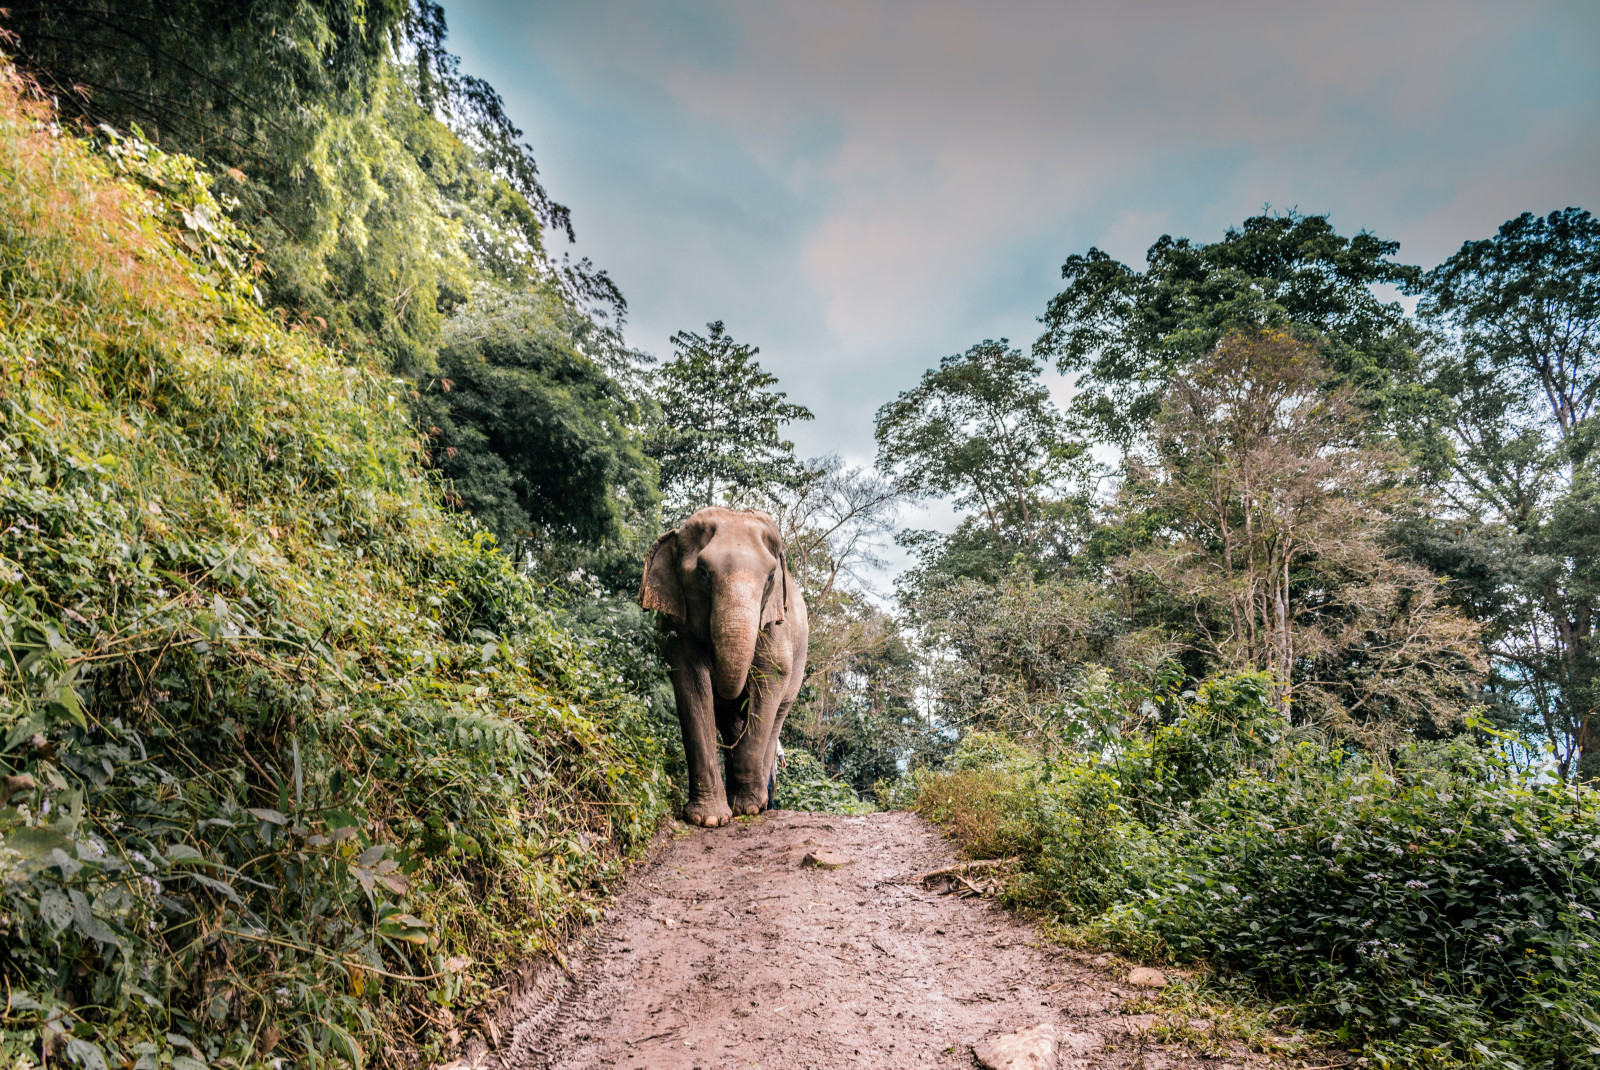 Elephant in a nature park in Chiang Mai, Thailand